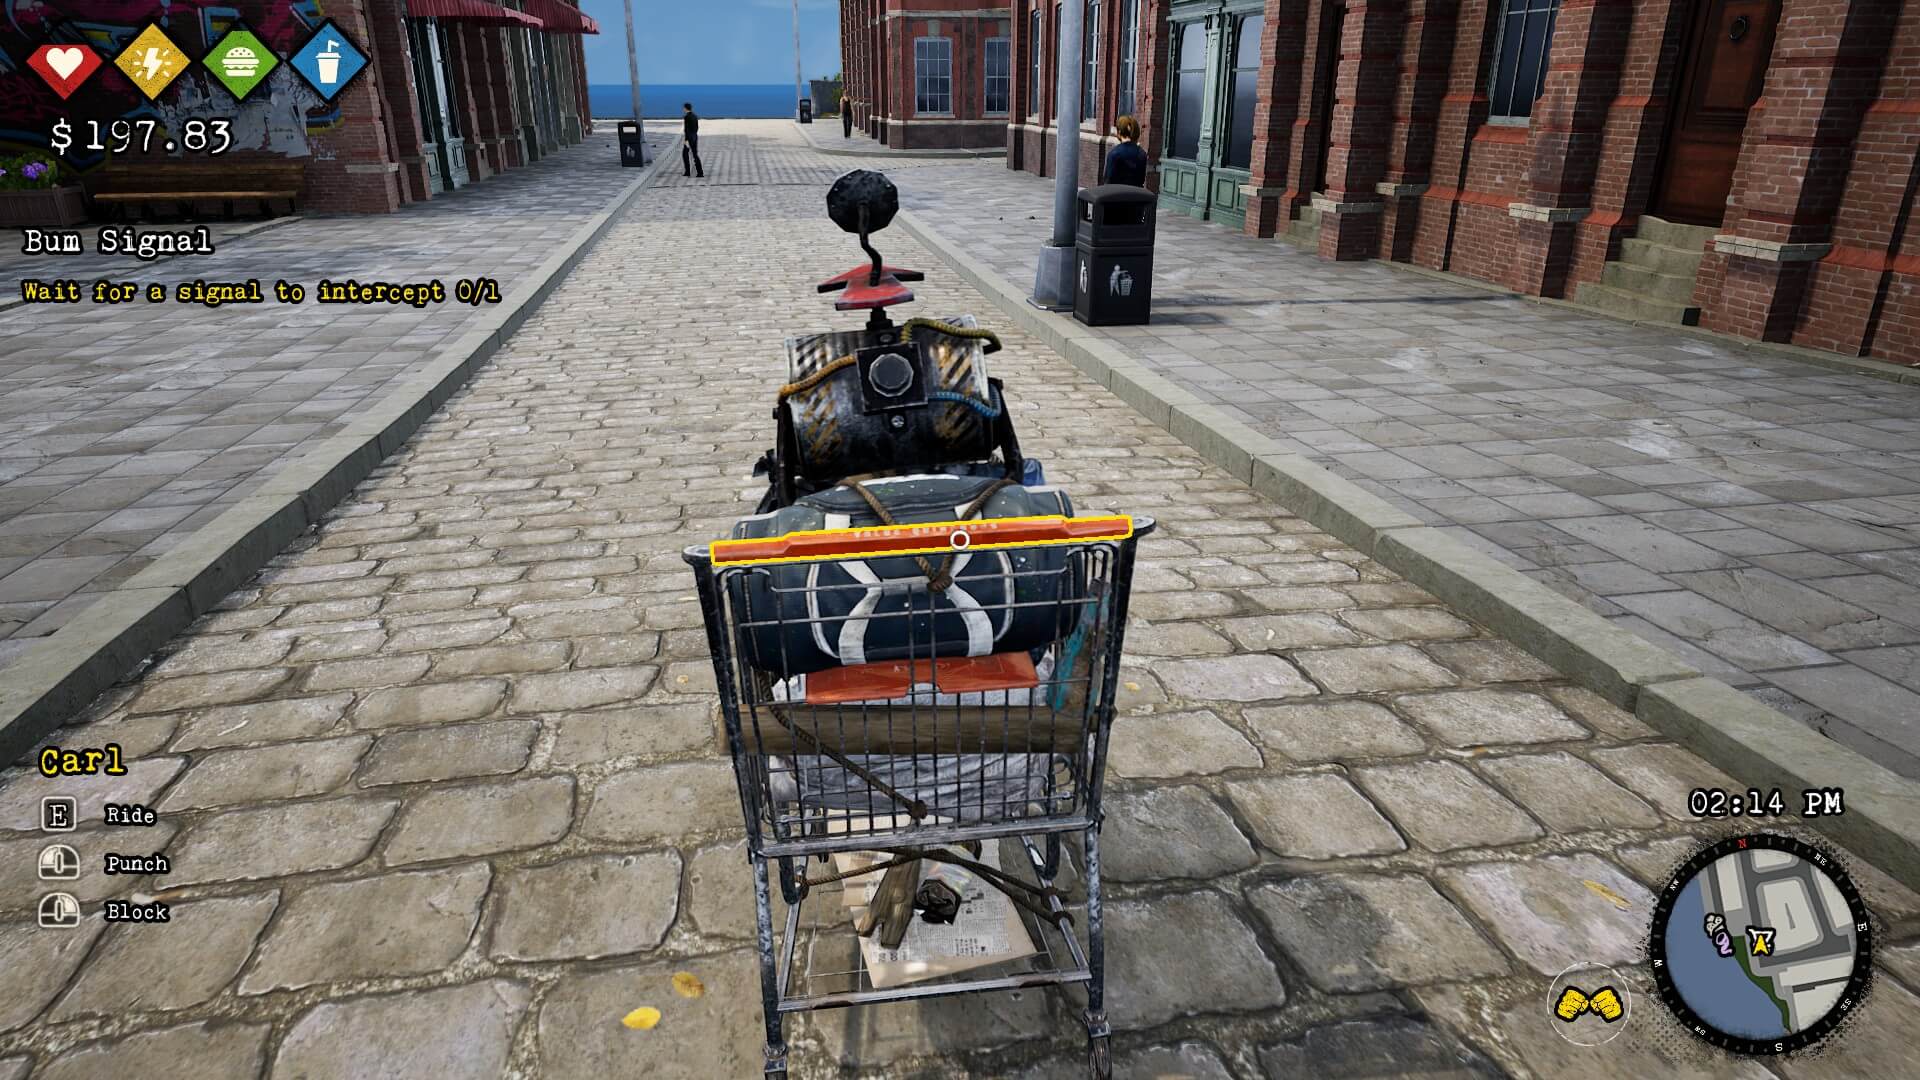 A shopping cart is in front of the player with a machine strappd on top. The handle bar is highlighted for the player to interact with it.